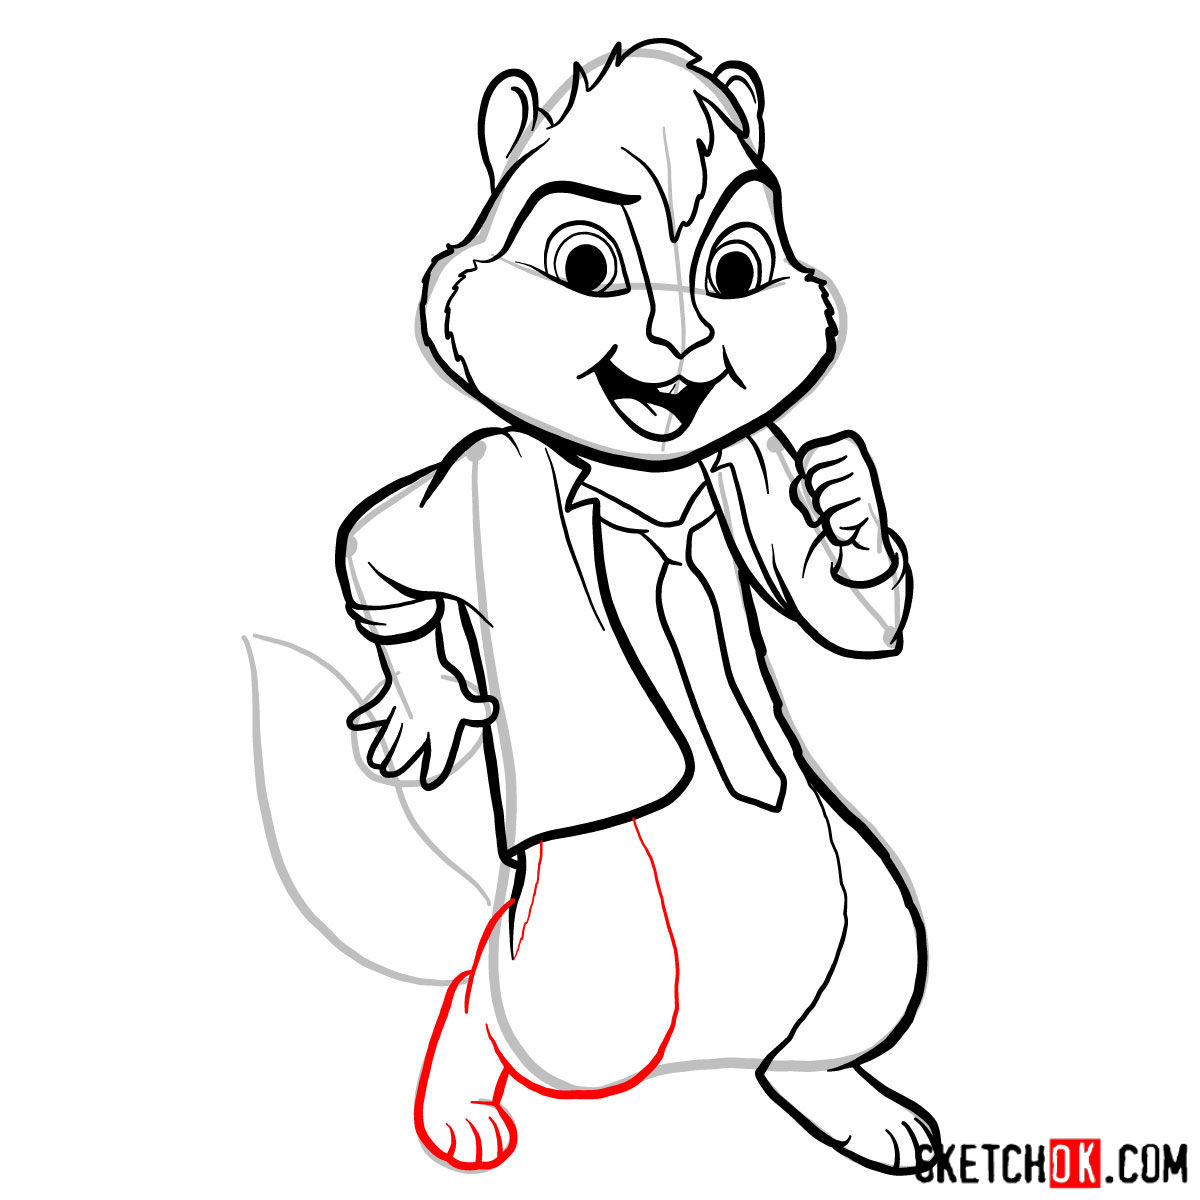 How to draw Alvin from Alvin and the Chipmunks - step 13